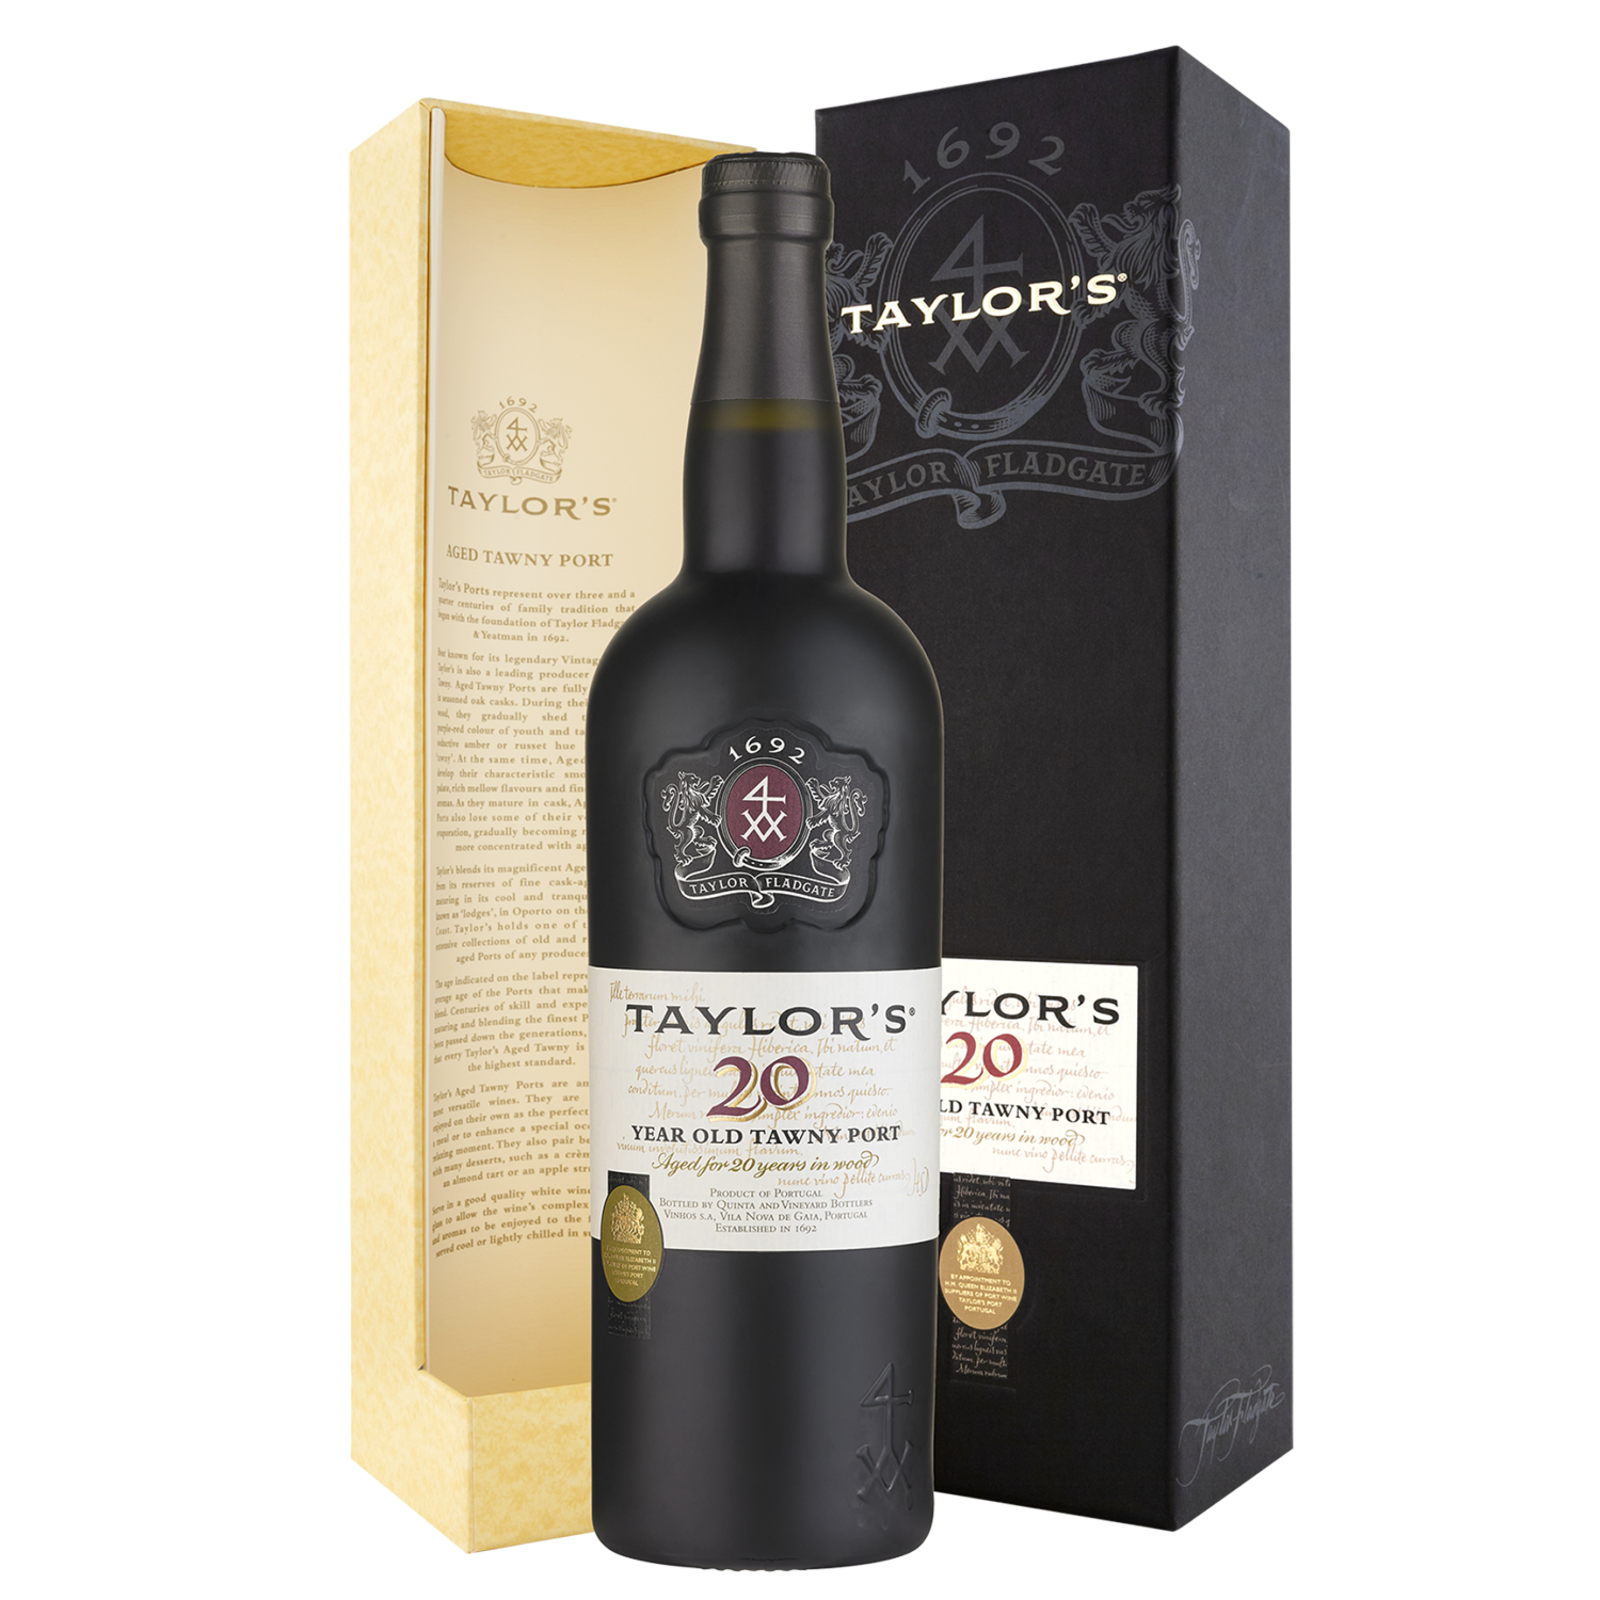 Taylor's Taylor's 20 Year Old Tawny Port in giftbox